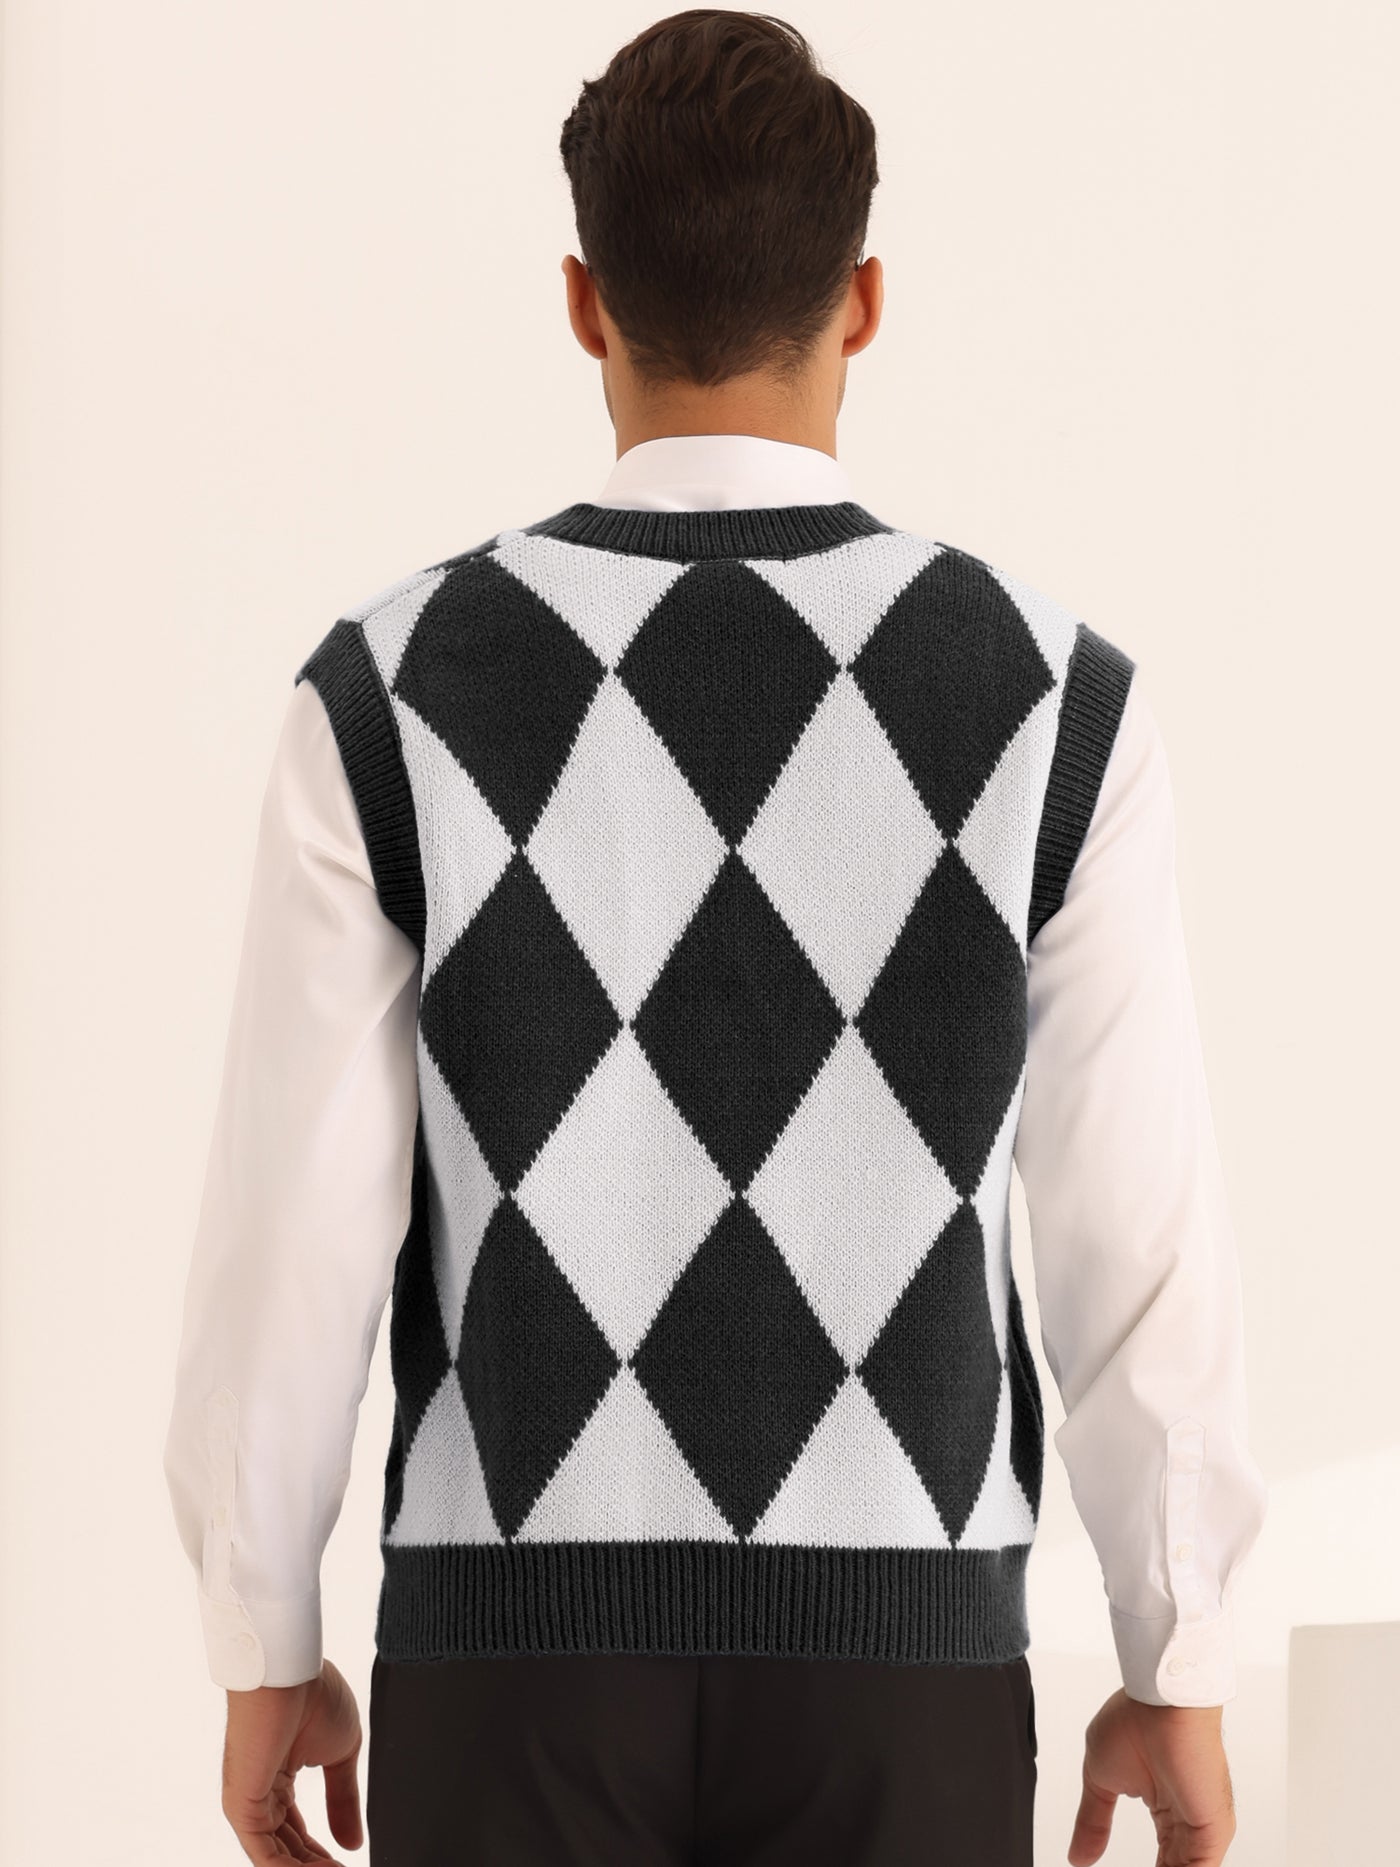 Bublédon Argyle Pattern Sweater Vests for Men's Classic V Neck Sleeveless Pullover Knit Sweaters